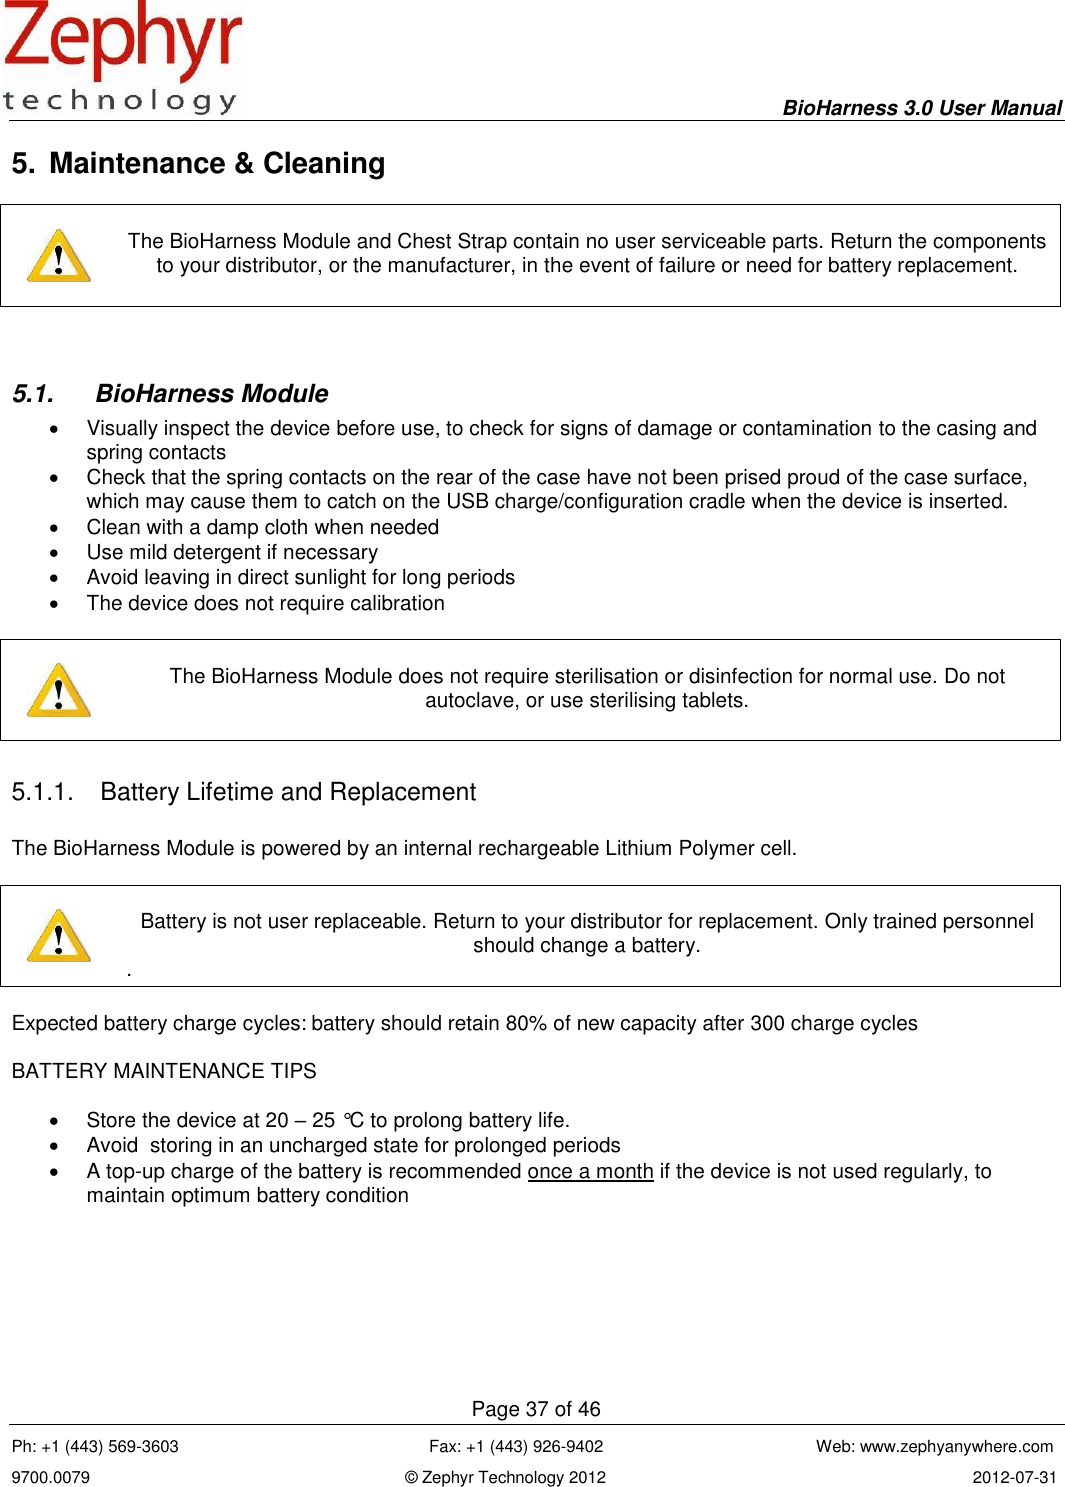     BioHarness 3.0 User Manual  Page 37 of 46 Ph: +1 (443) 569-3603                                                      Fax: +1 (443) 926-9402                                              Web: www.zephyanywhere.com 9700.0079                                                                    © Zephyr Technology 2012                                                                               2012-07-31                                                                                                                                      5.  Maintenance &amp; Cleaning      The BioHarness Module and Chest Strap contain no user serviceable parts. Return the components to your distributor, or the manufacturer, in the event of failure or need for battery replacement.   5.1.  BioHarness Module   Visually inspect the device before use, to check for signs of damage or contamination to the casing and spring contacts   Check that the spring contacts on the rear of the case have not been prised proud of the case surface, which may cause them to catch on the USB charge/configuration cradle when the device is inserted.   Clean with a damp cloth when needed   Use mild detergent if necessary   Avoid leaving in direct sunlight for long periods   The device does not require calibration      The BioHarness Module does not require sterilisation or disinfection for normal use. Do not autoclave, or use sterilising tablets.  5.1.1.  Battery Lifetime and Replacement  The BioHarness Module is powered by an internal rechargeable Lithium Polymer cell.      Battery is not user replaceable. Return to your distributor for replacement. Only trained personnel should change a battery. .  Expected battery charge cycles: battery should retain 80% of new capacity after 300 charge cycles  BATTERY MAINTENANCE TIPS    Store the device at 20 – 25 °C to prolong battery life.   Avoid  storing in an uncharged state for prolonged periods    A top-up charge of the battery is recommended once a month if the device is not used regularly, to maintain optimum battery condition   